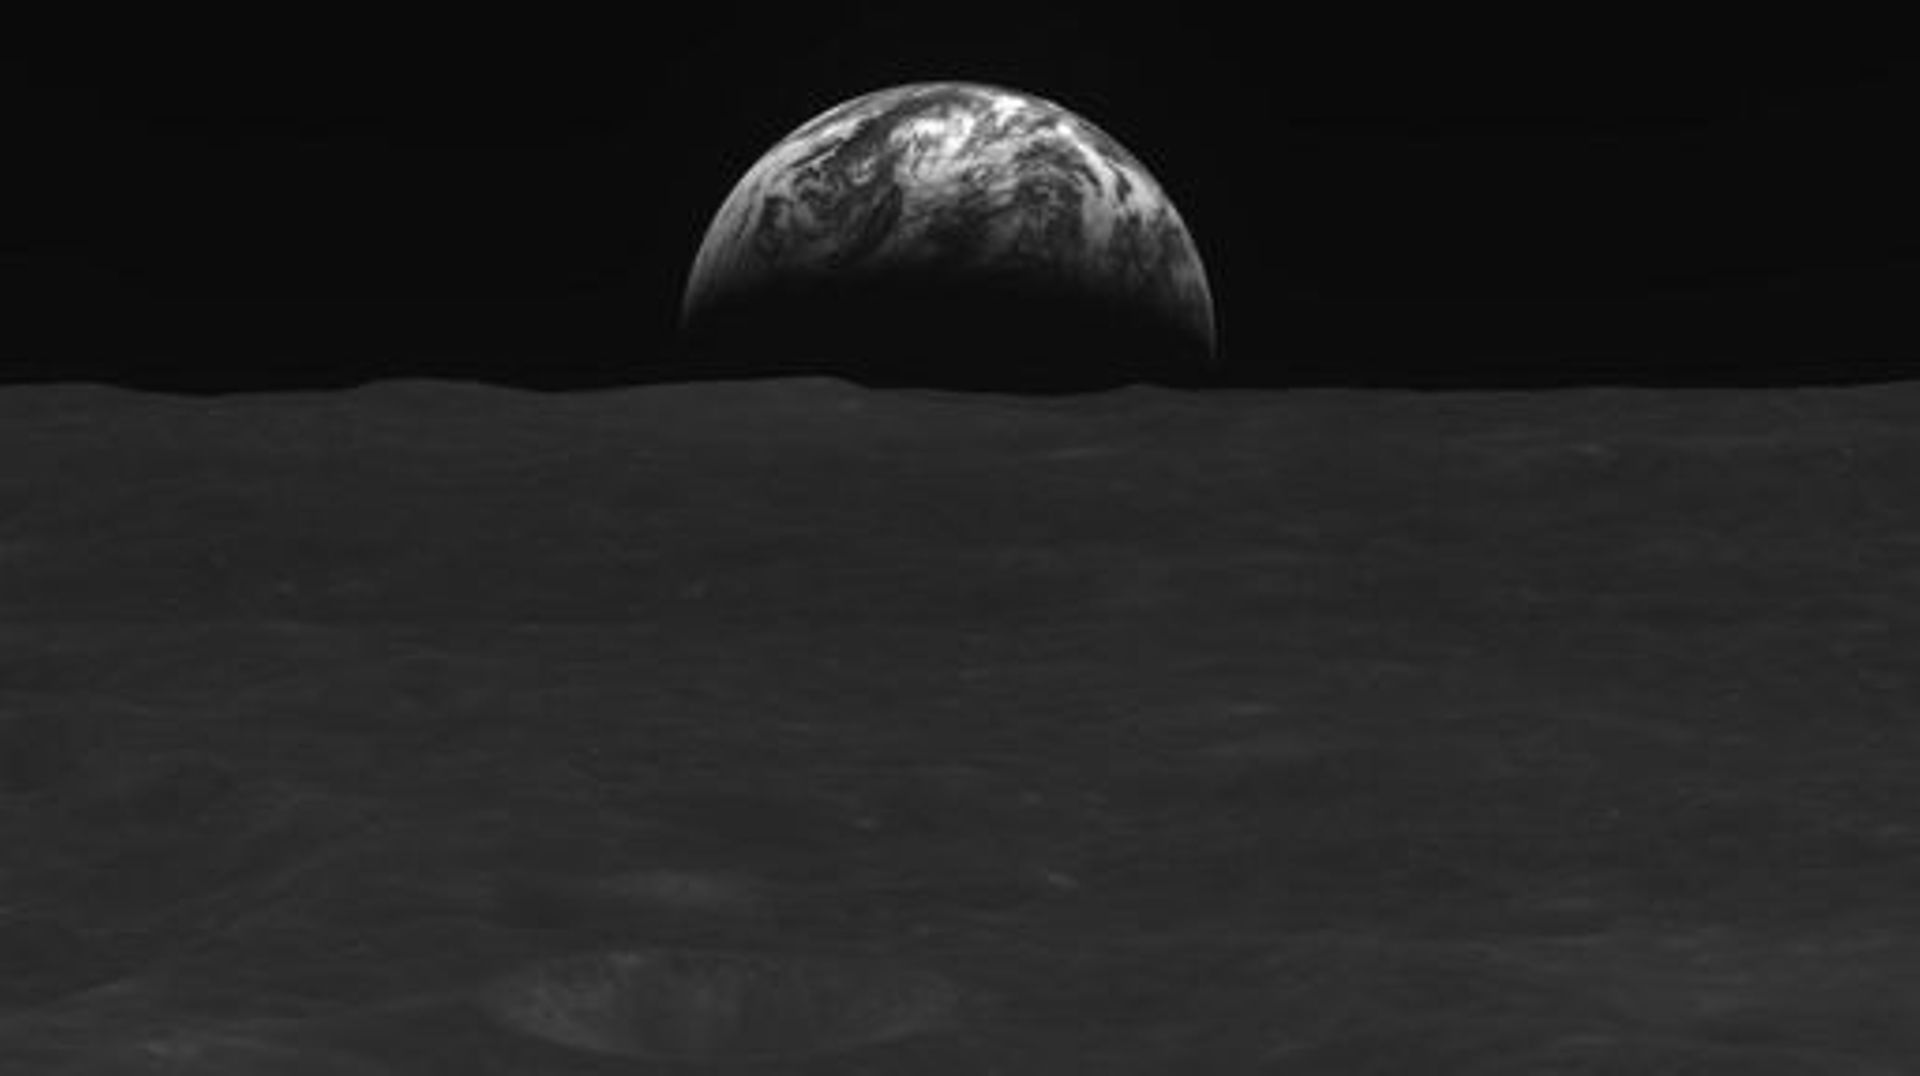 This handout image taken on December 31, 2022 and provided by the Korea Aerospace Research Institute (KARI) on January 3, 2023 shows a black-and-white image of the lunar surface and Earth taken by South Korean lunar orbiter Danuri after reaching the moon'